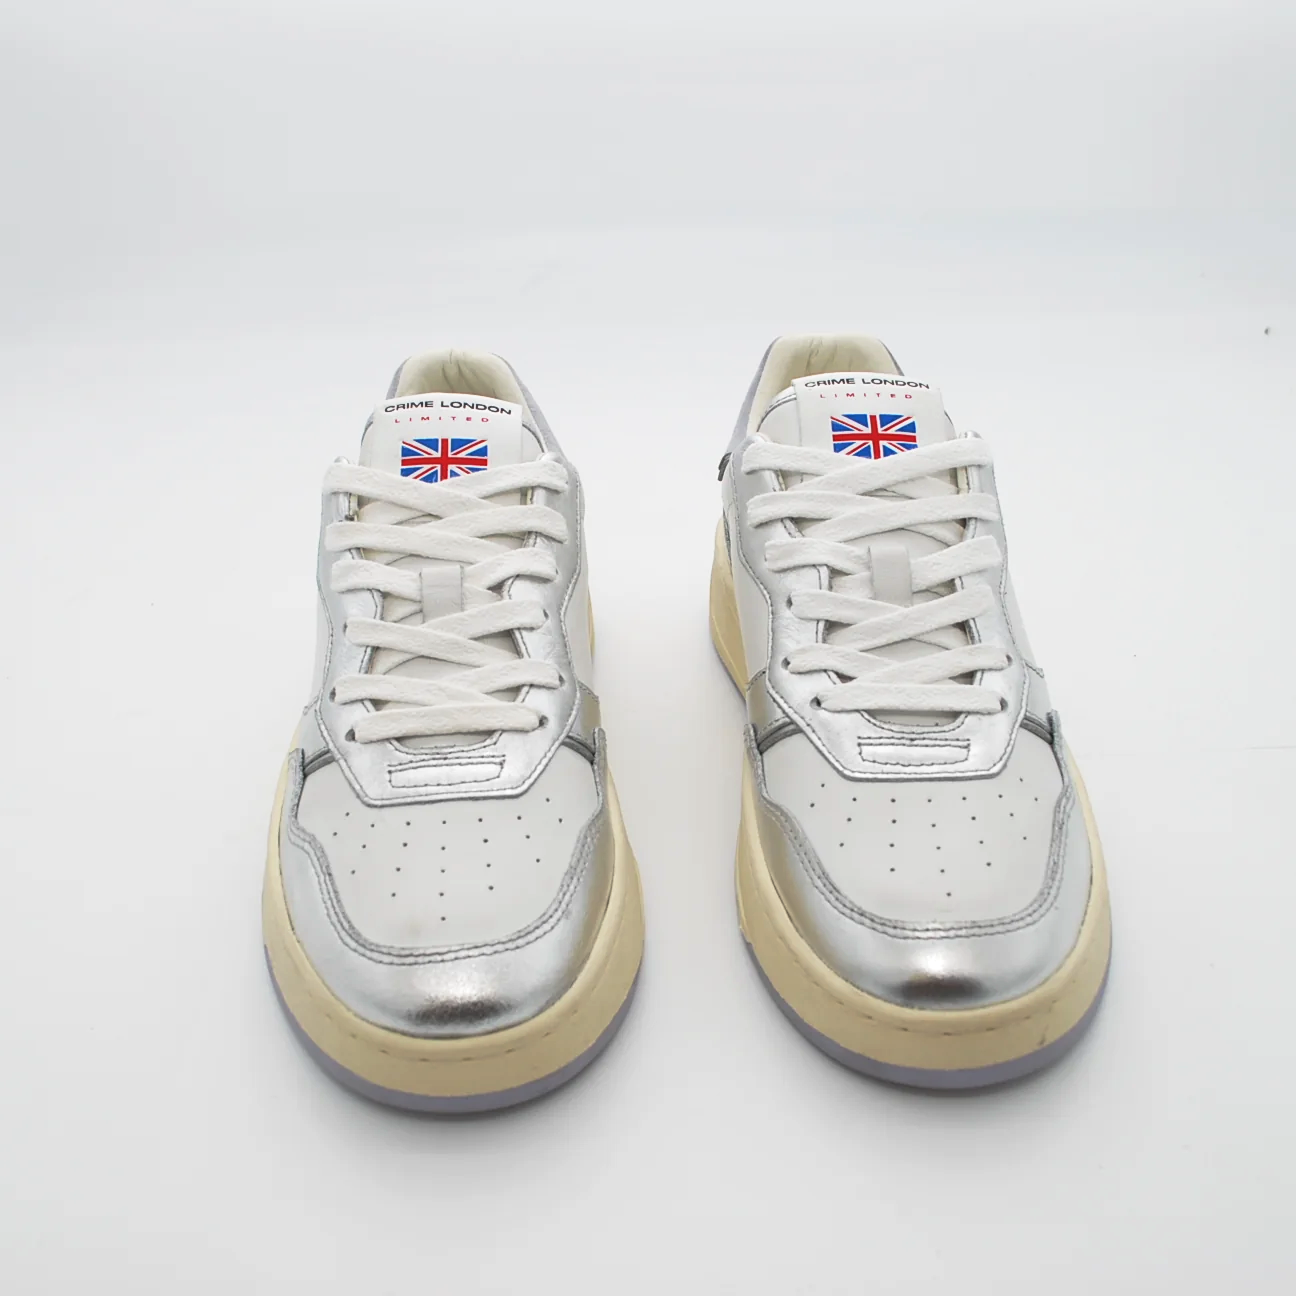 Sneakers Crime London Timeless to the moon